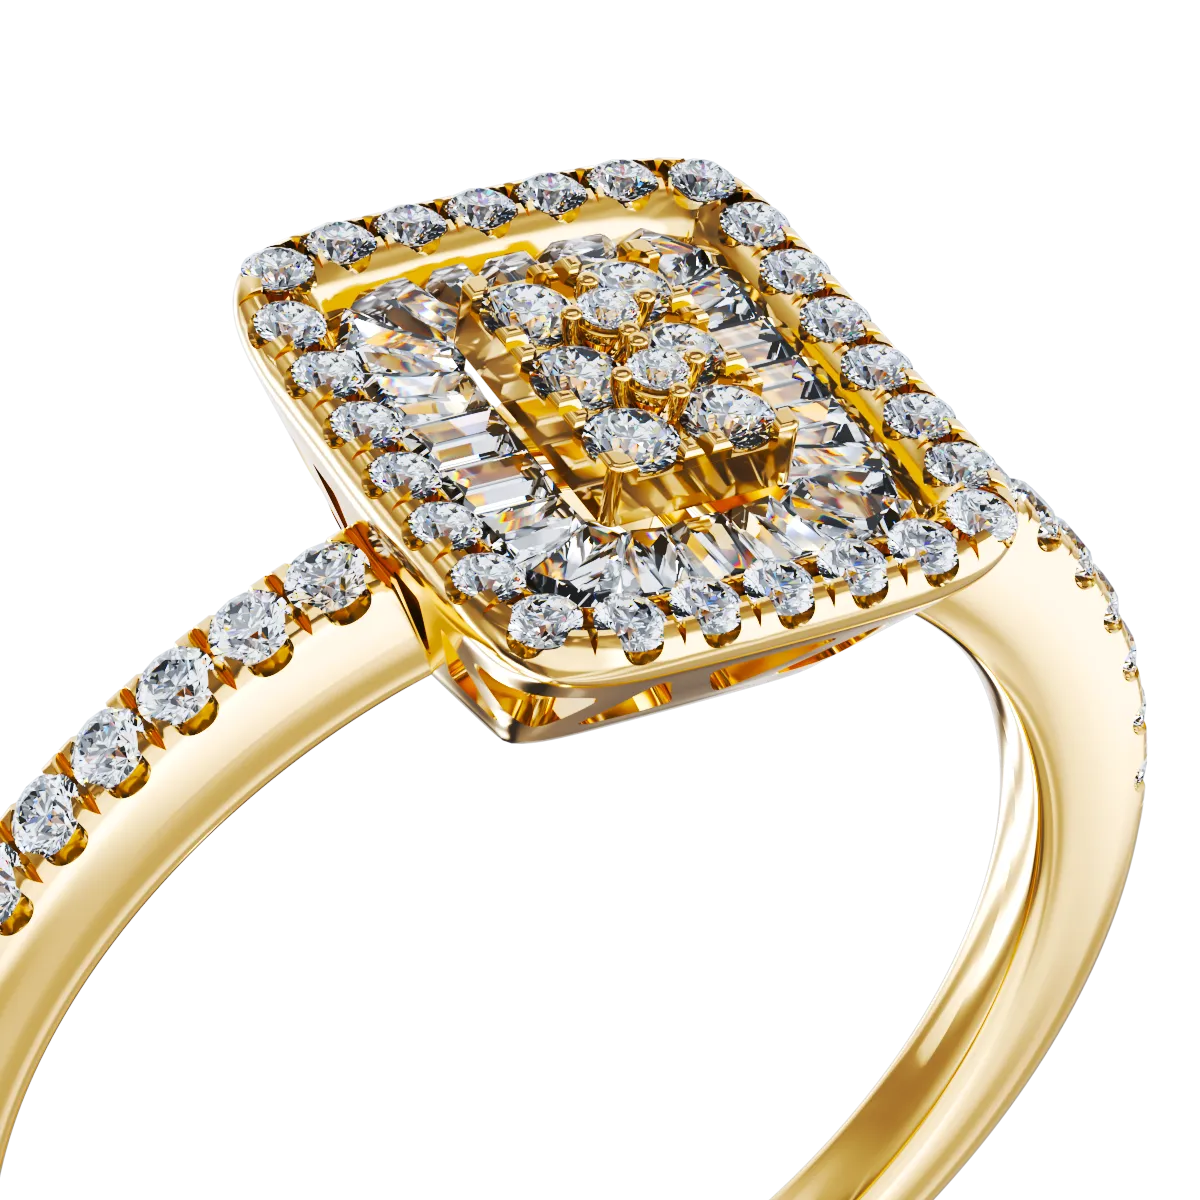 18K yellow gold engagement ring with 0.27ct diamonds